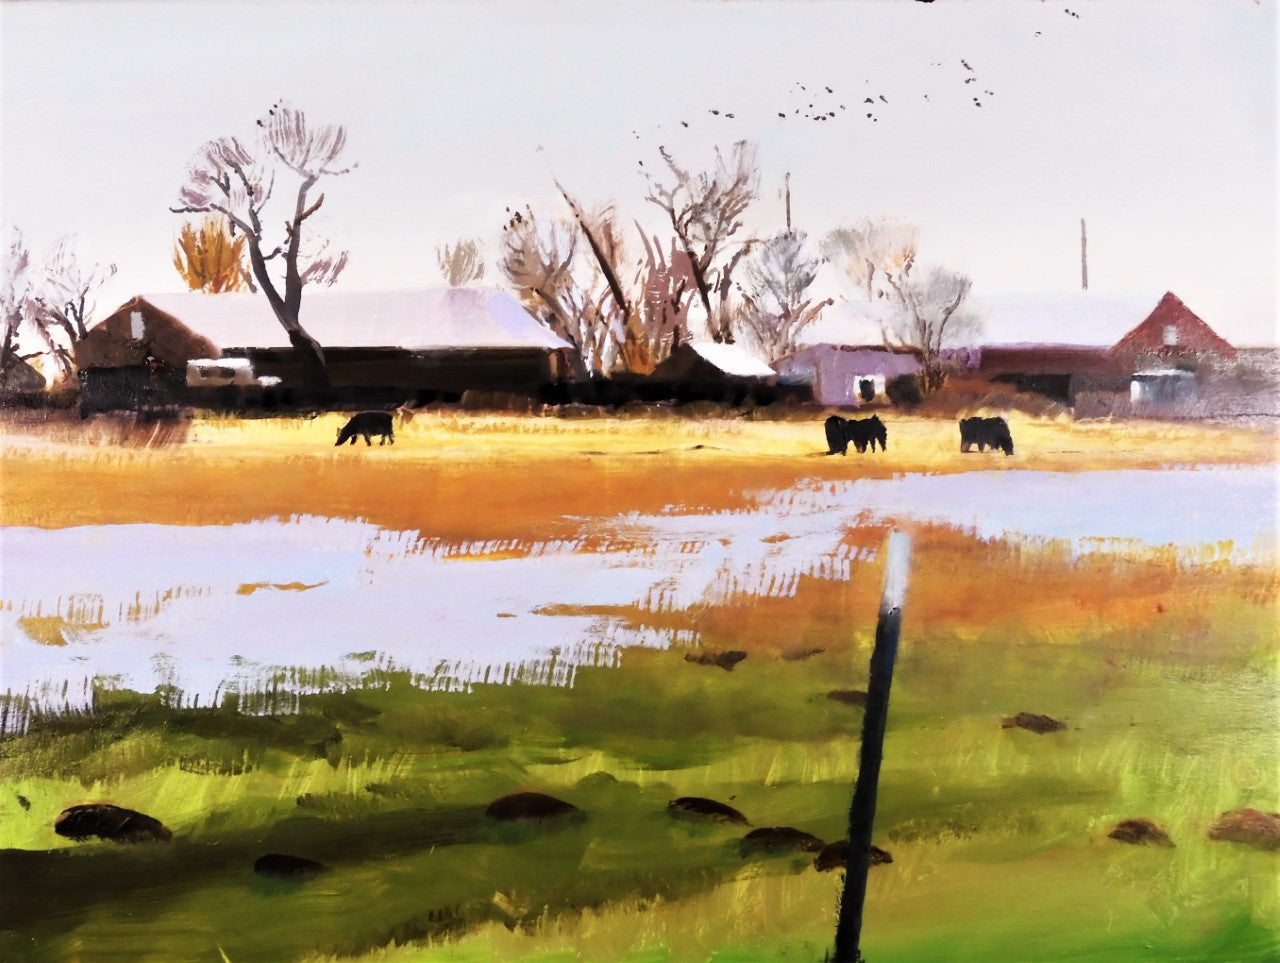 Original oil on canvas  Cattle grazing on a flooded meadow in the Spring  Barn and homestead in the background with a flock of birds flying overhead  Framed in a dark graphite metal frame  24" long x 18" high original oil  D-ring and wire on the back for hanging